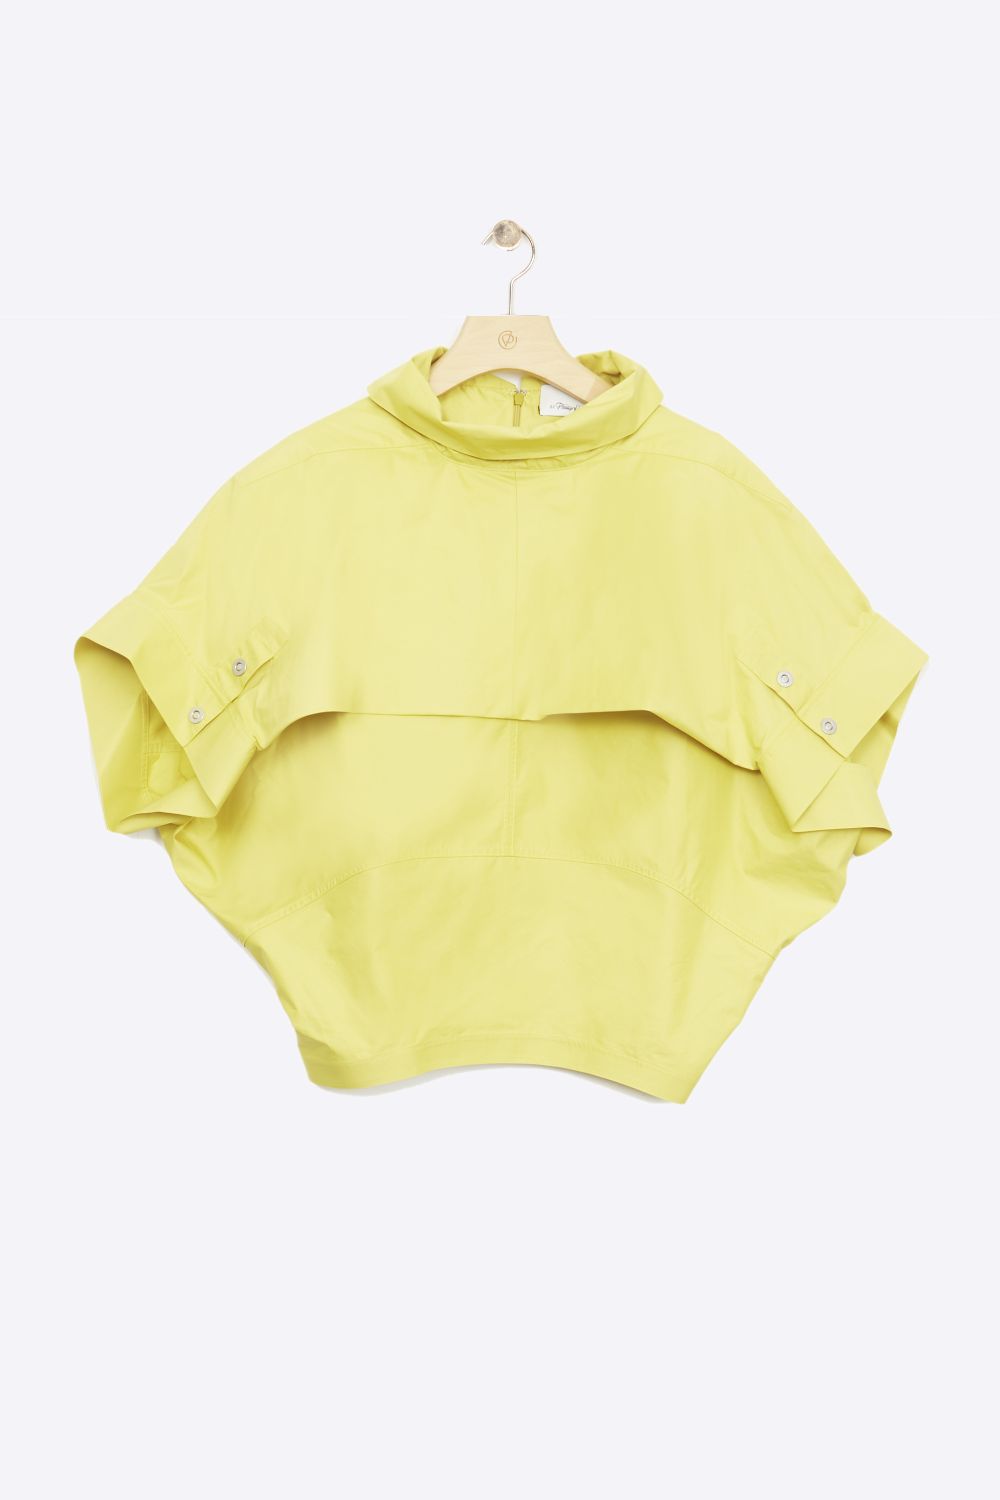 Dolman Sleeve Top in light chartreuse | 3.1 Phillip Lim Official Site